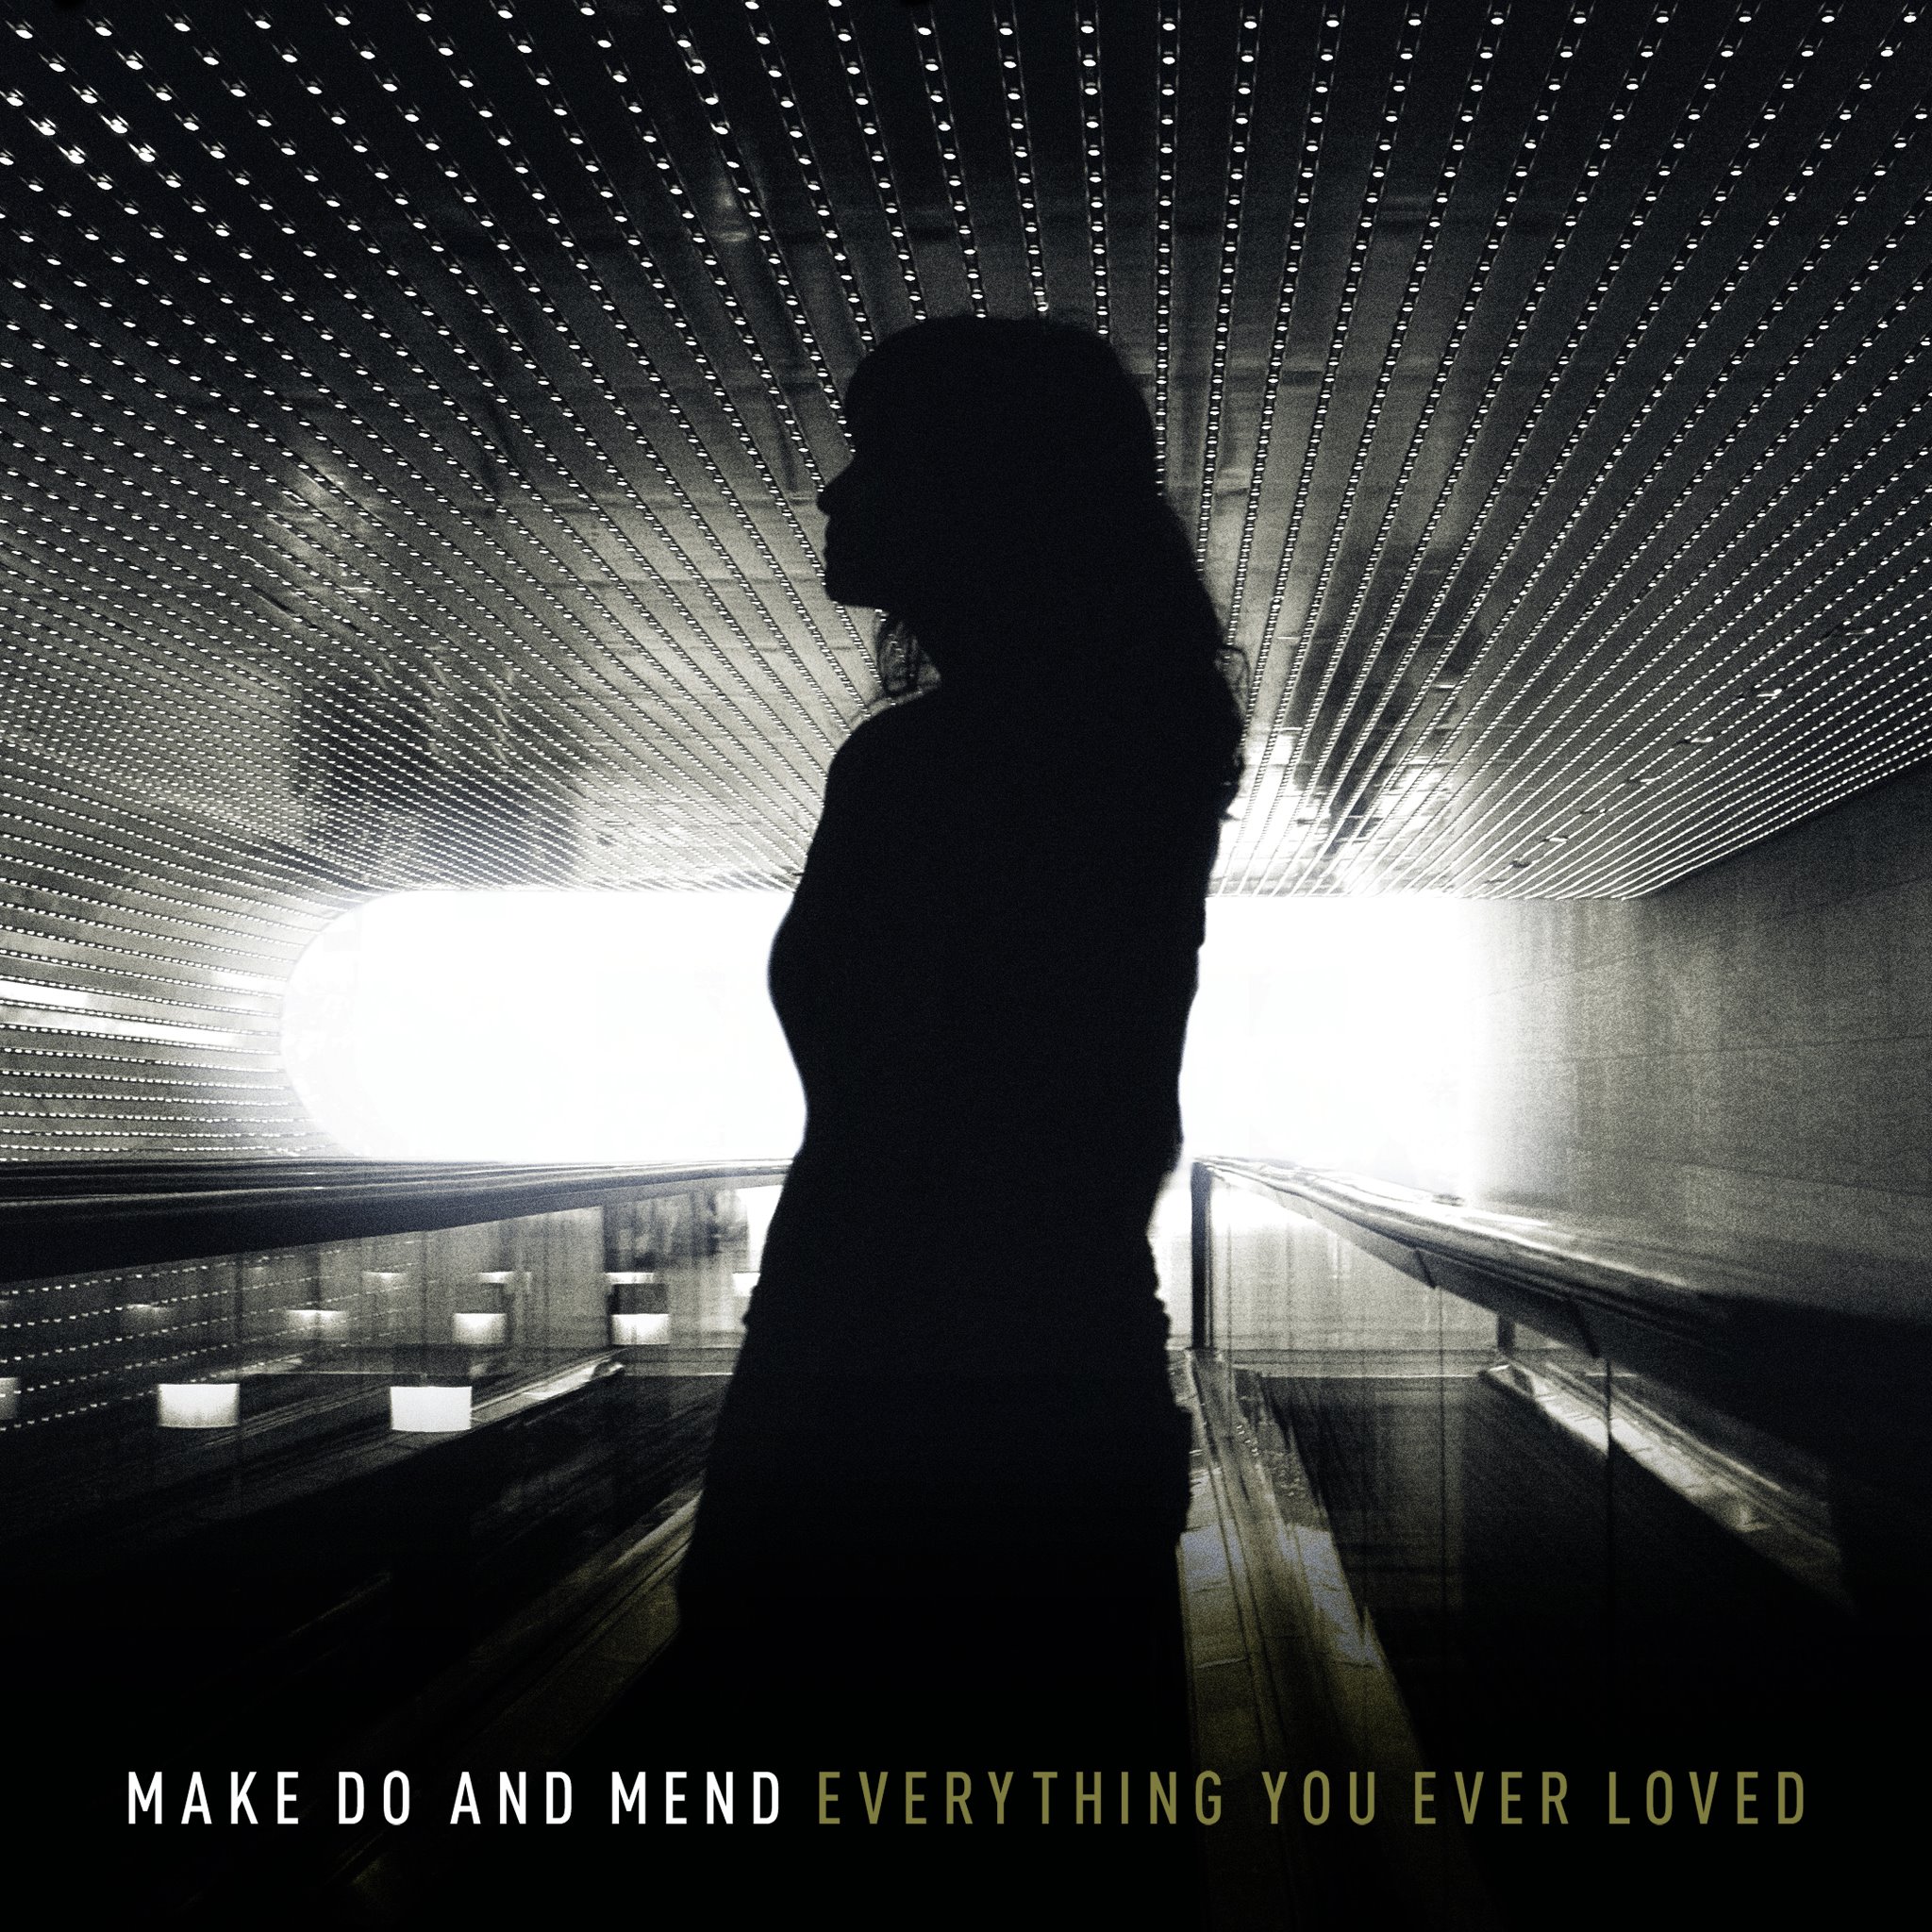 Make Do And Mend put up pre-orders and new song of new album